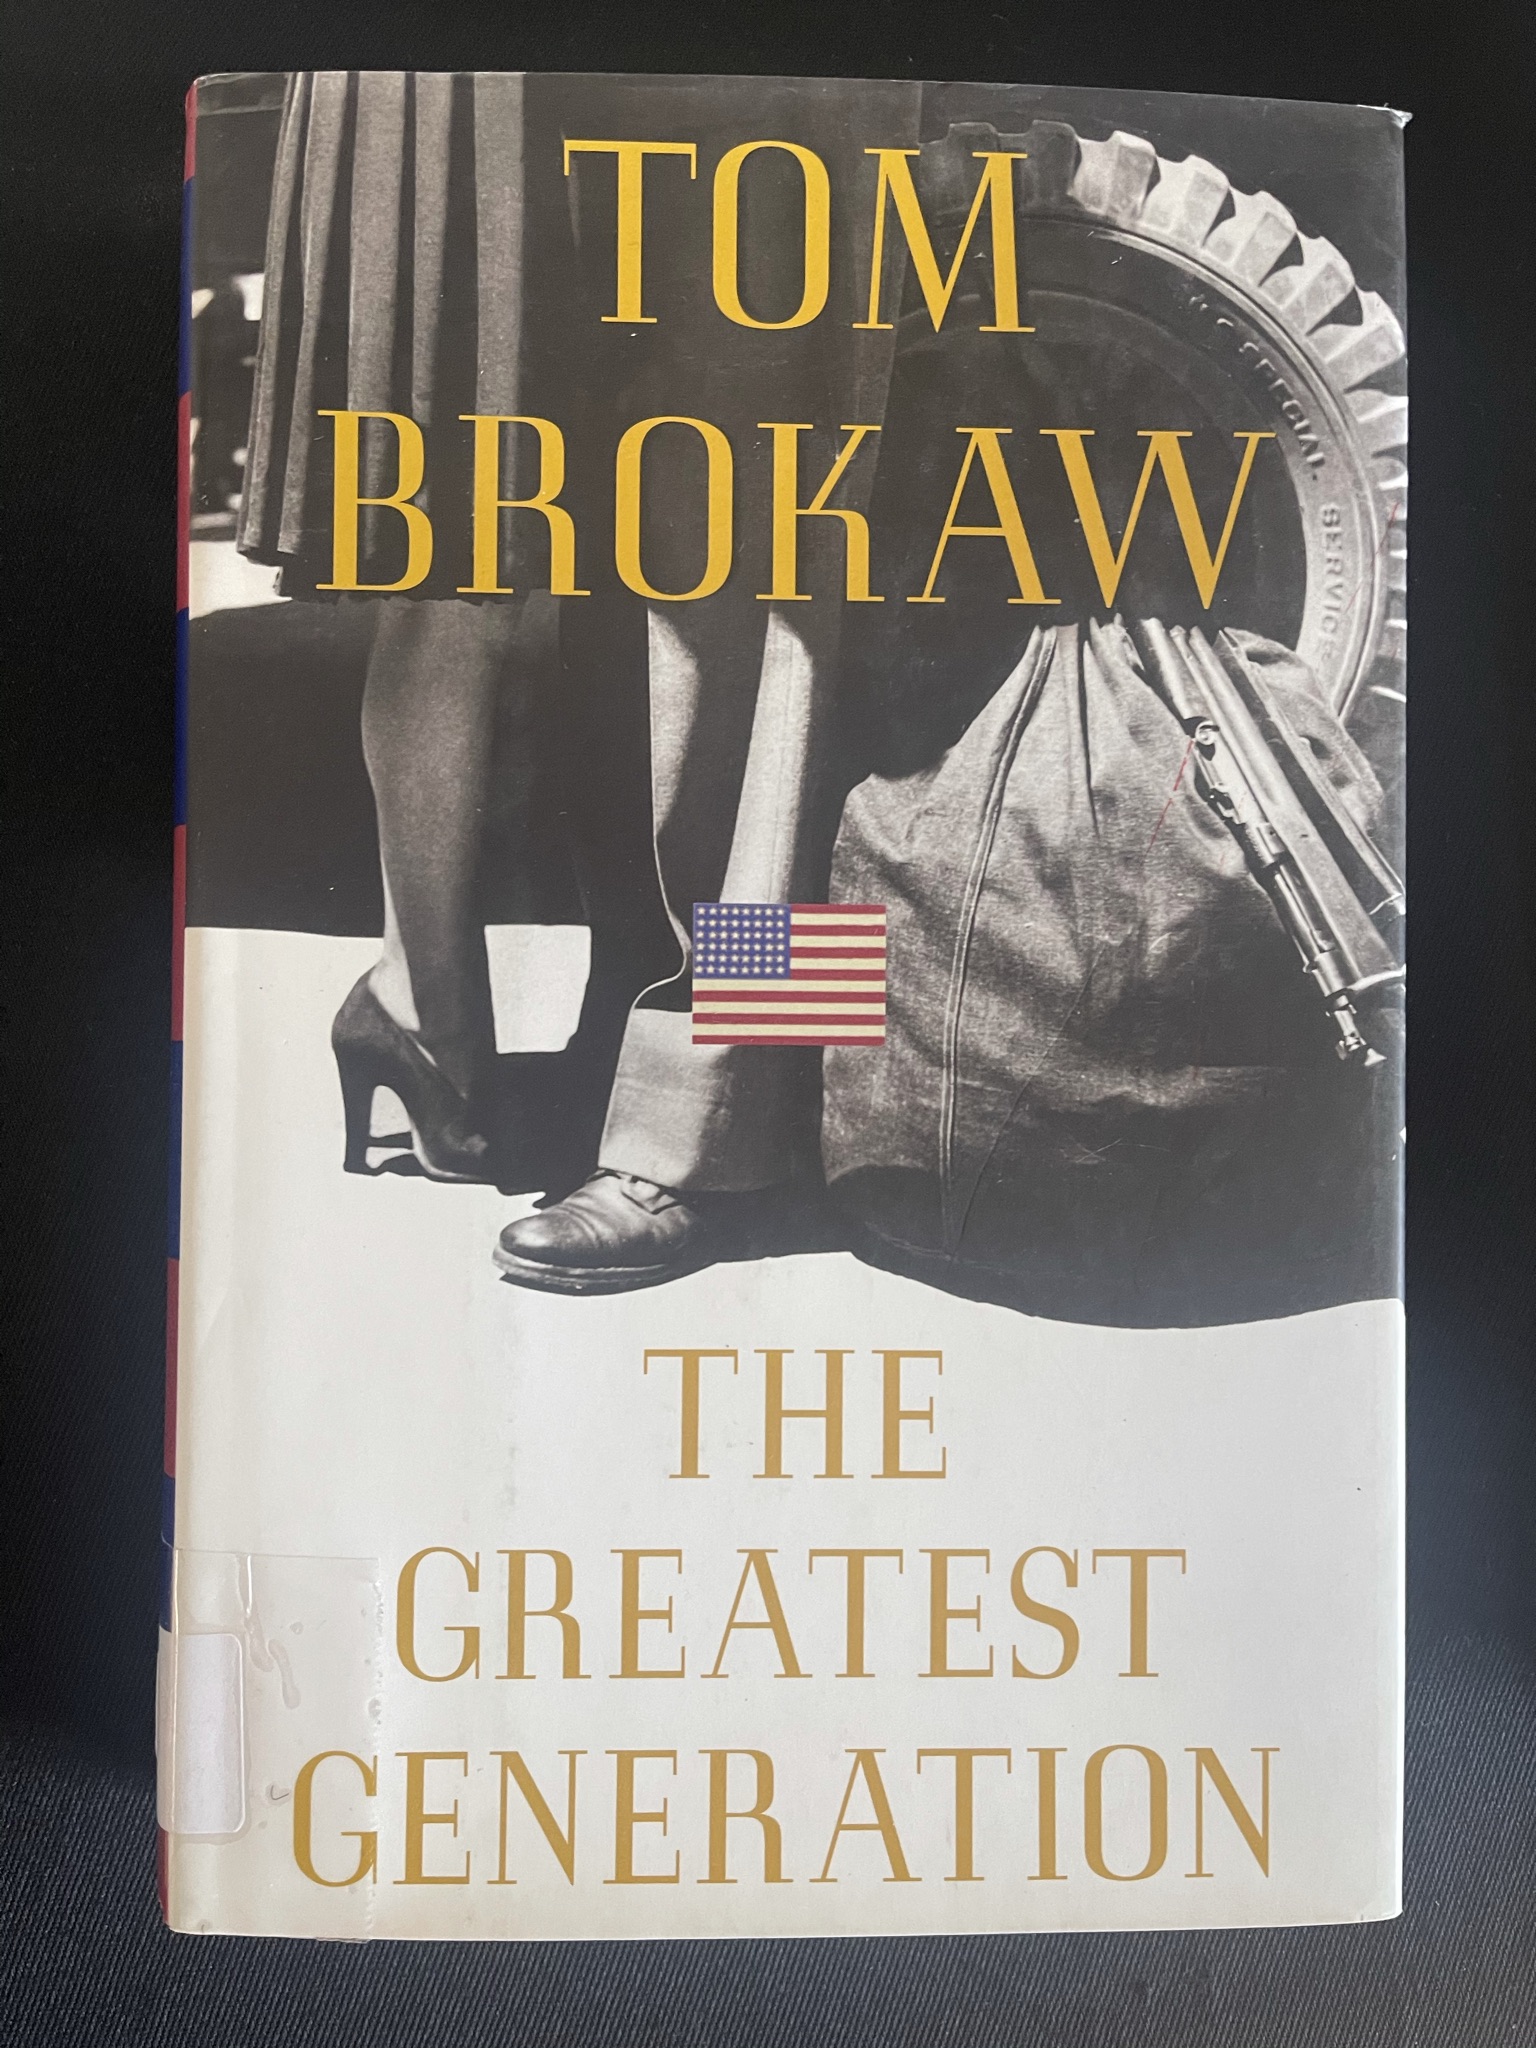 Featured image for “Tom Brokaw Greatest Generation”